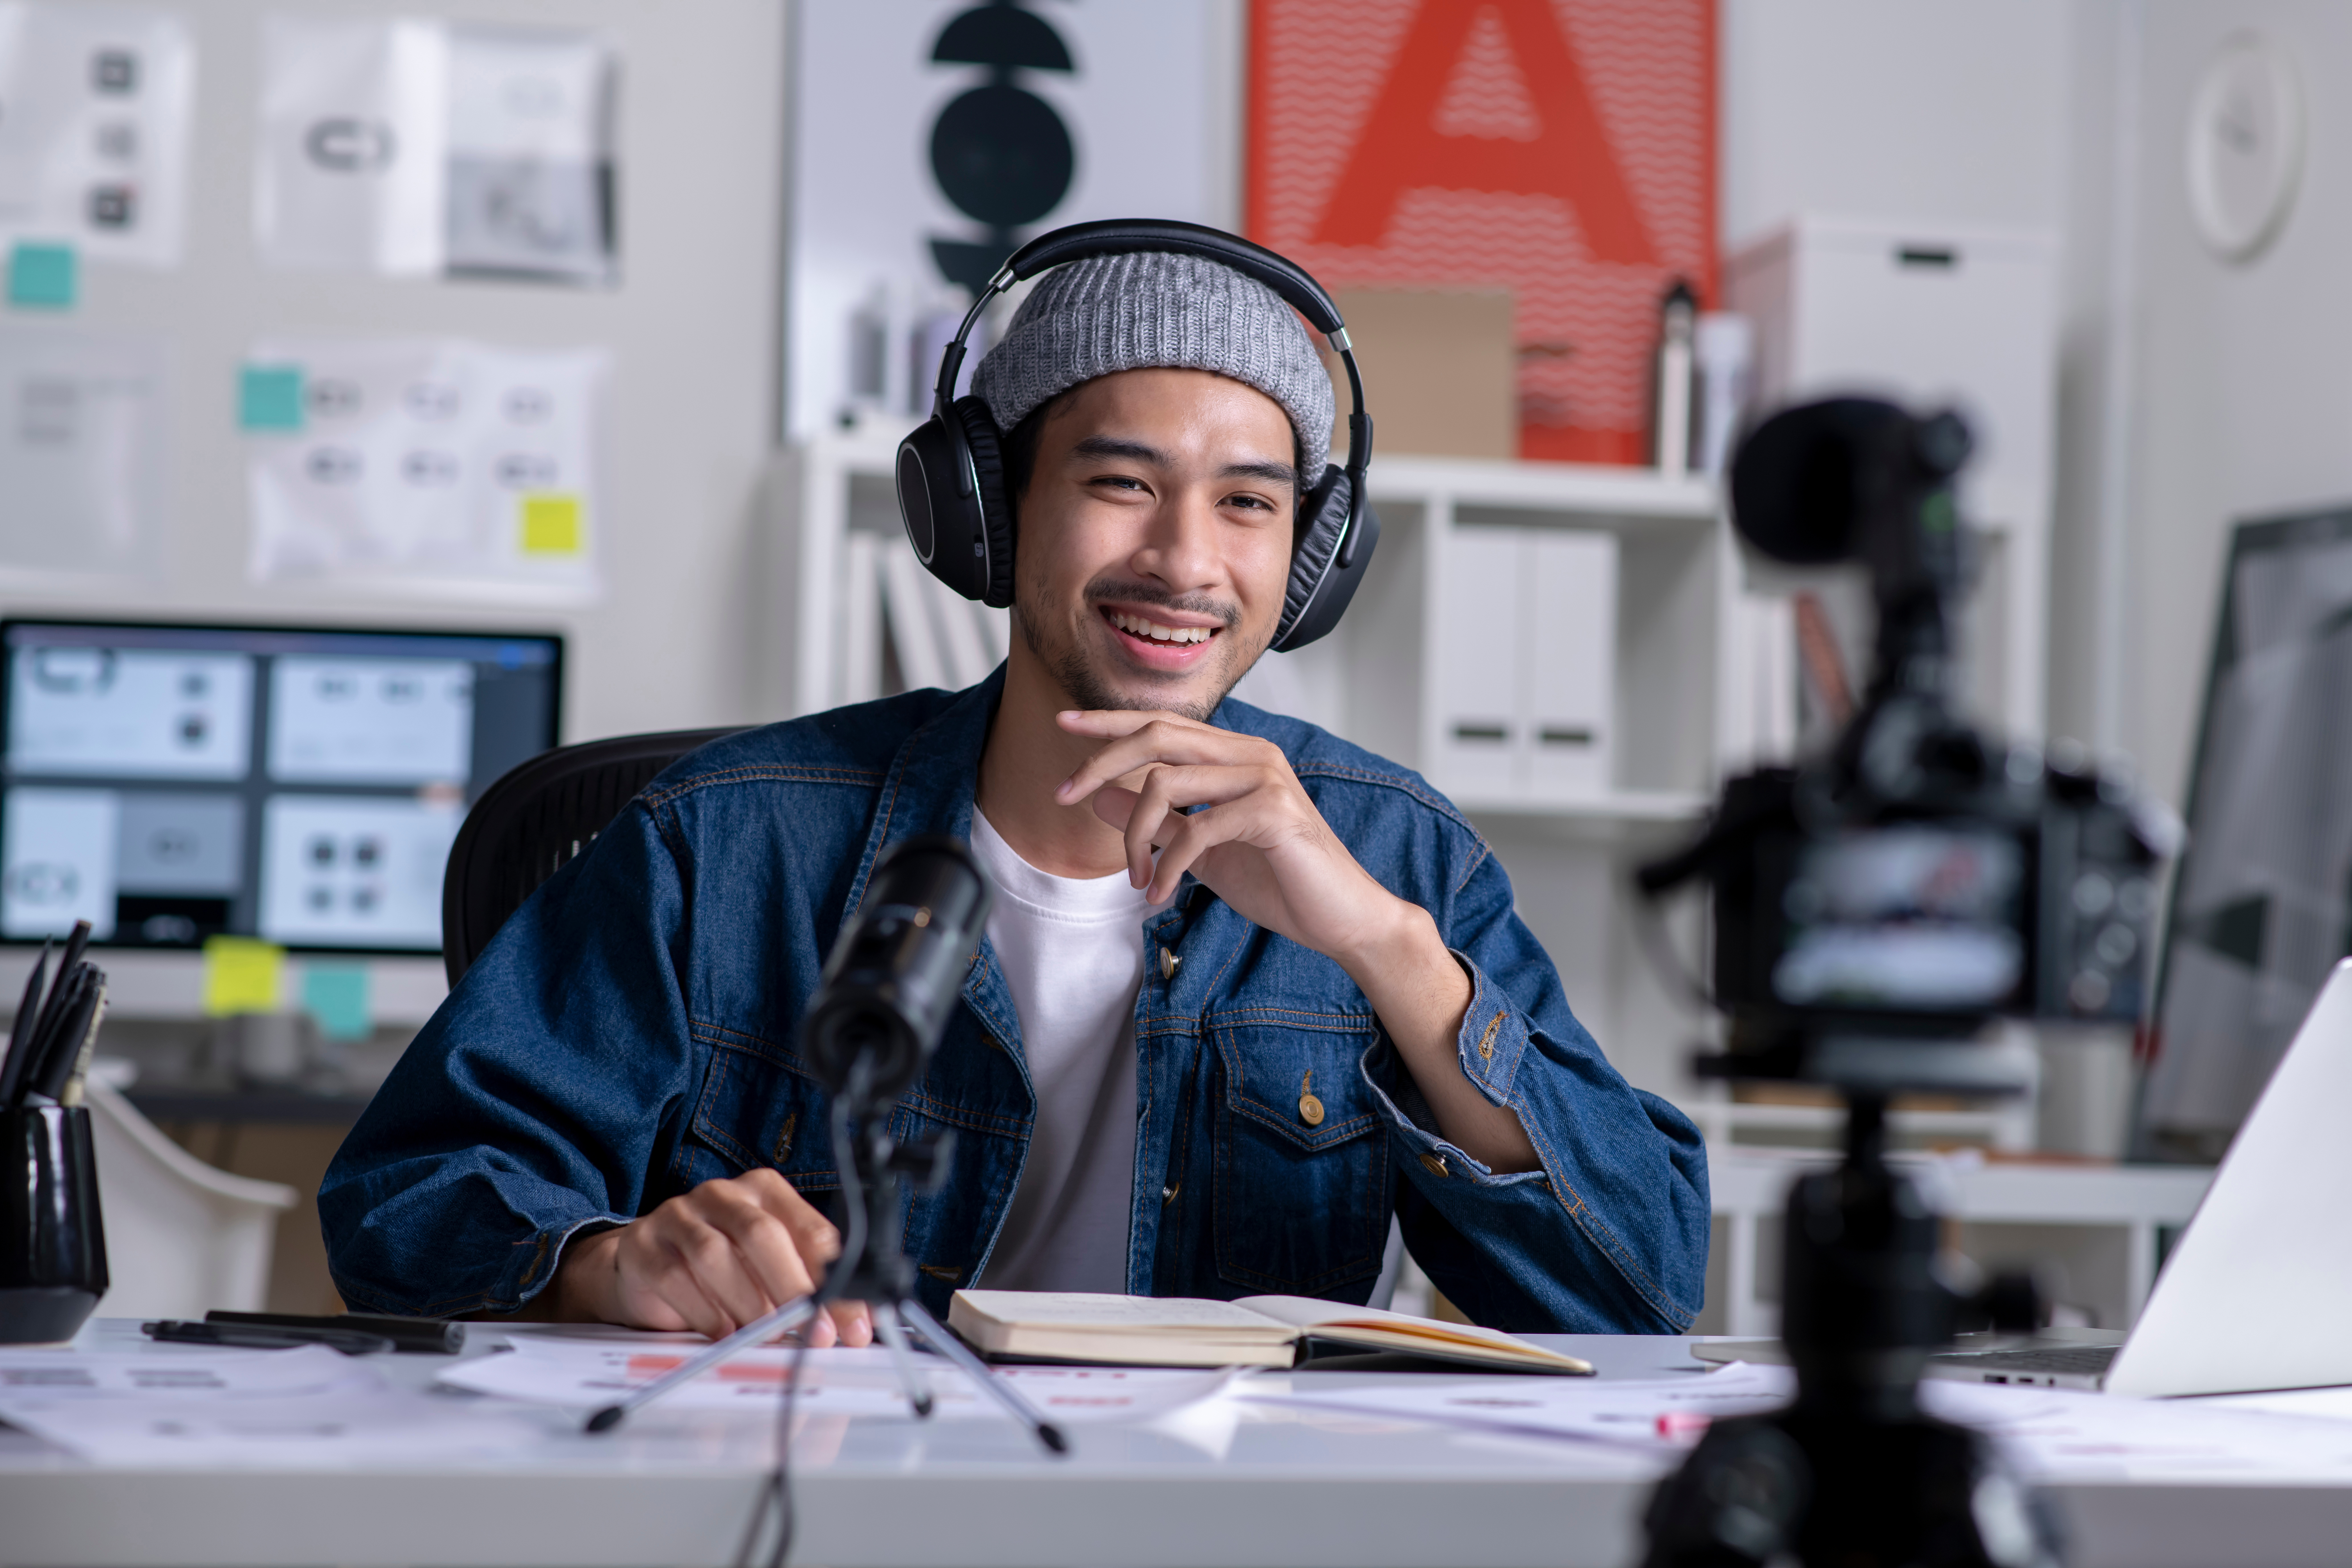 A smiling young man wearing a jeans jacket, wool cap, and headphones sits at a desk and talks to a camera in front of him.